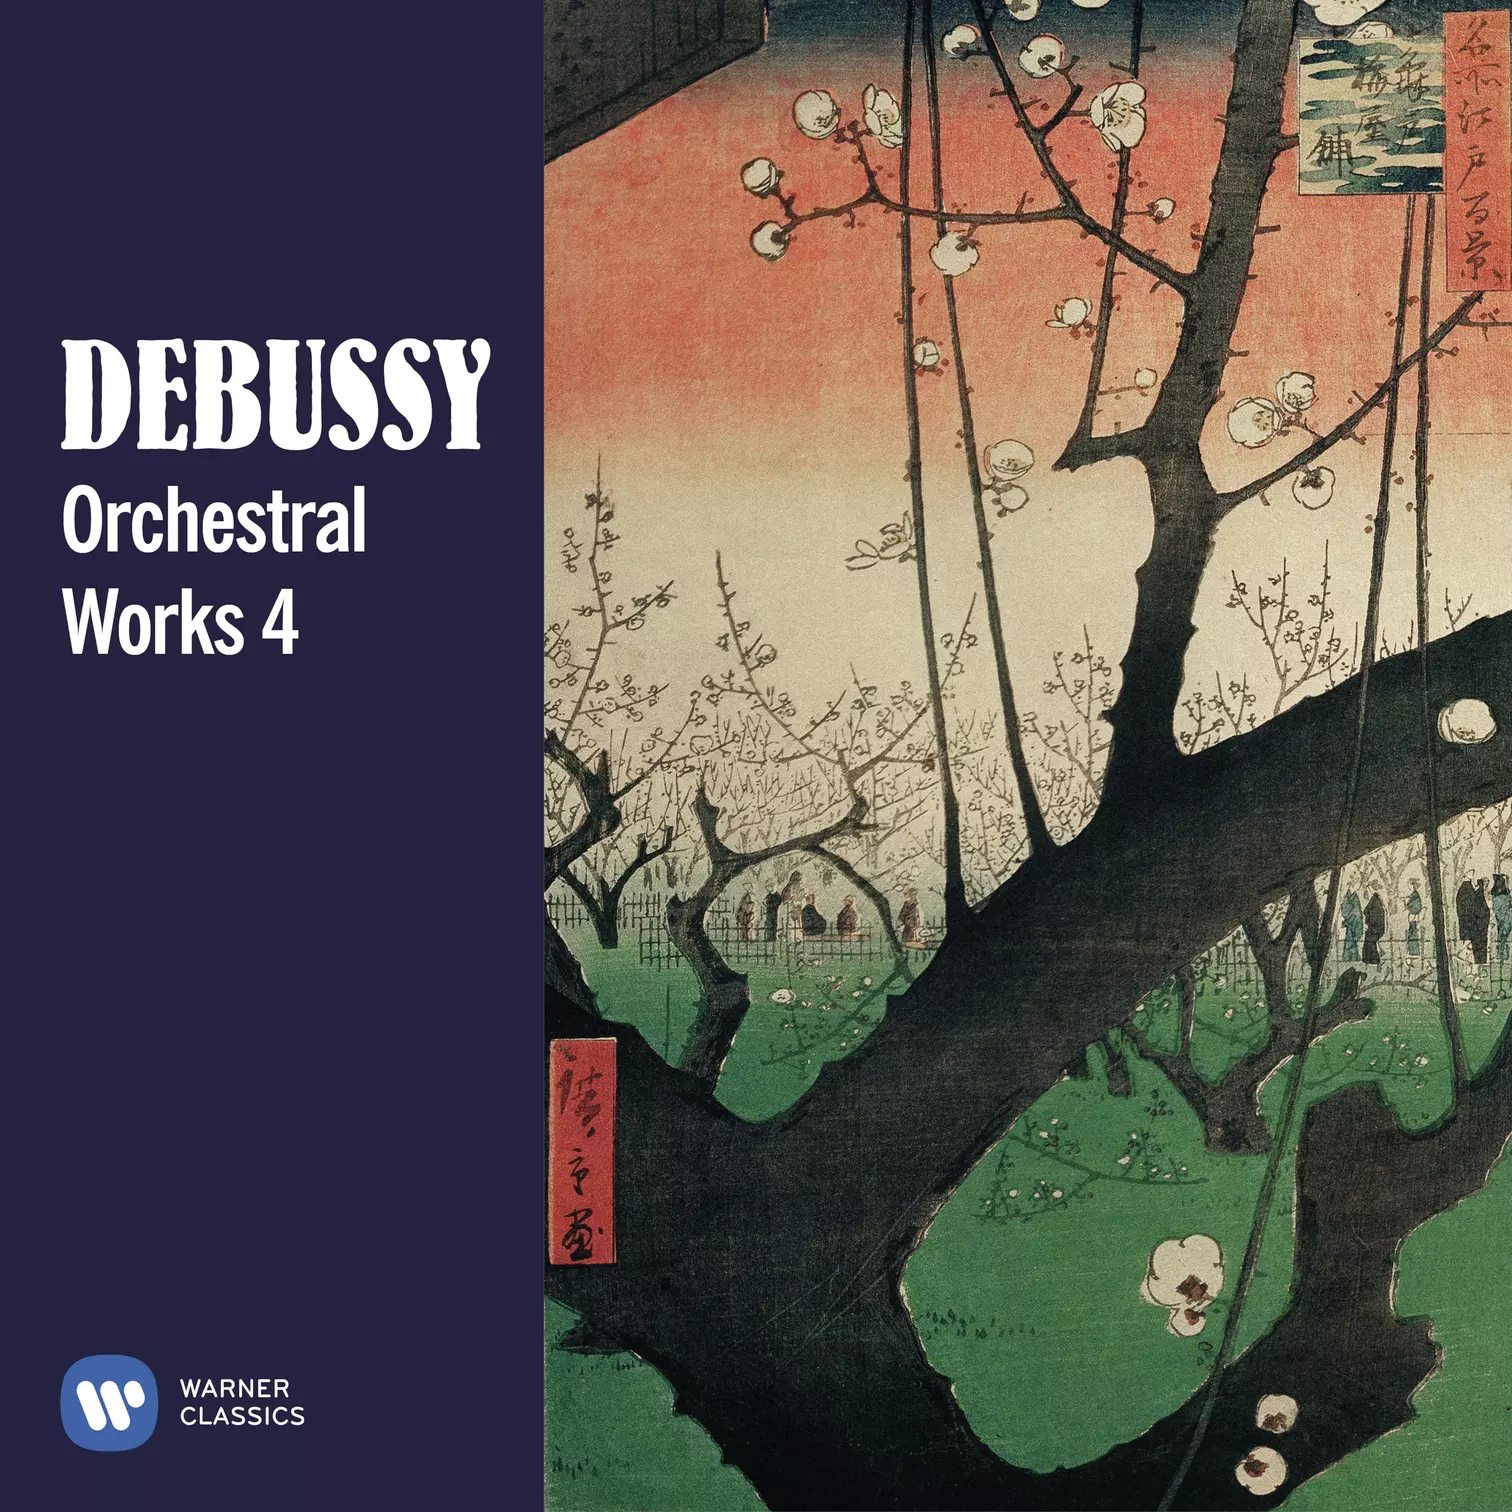 Debussy: Orchestral Works 4